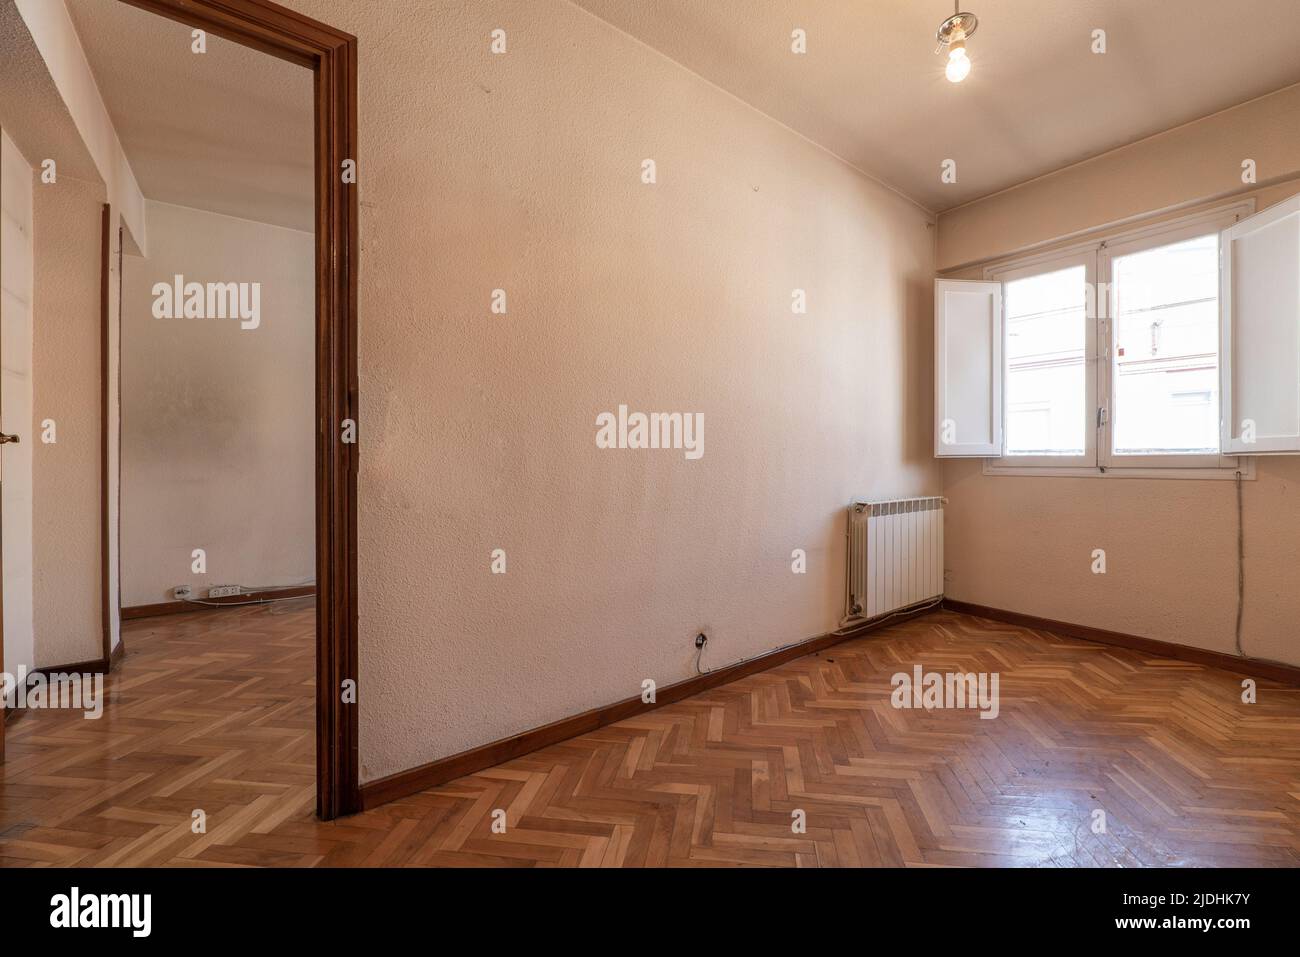 Empty room with bright oak parquet floor, white painted walls and reddish woodwork on white wooden doors and windows with shutters Stock Photo